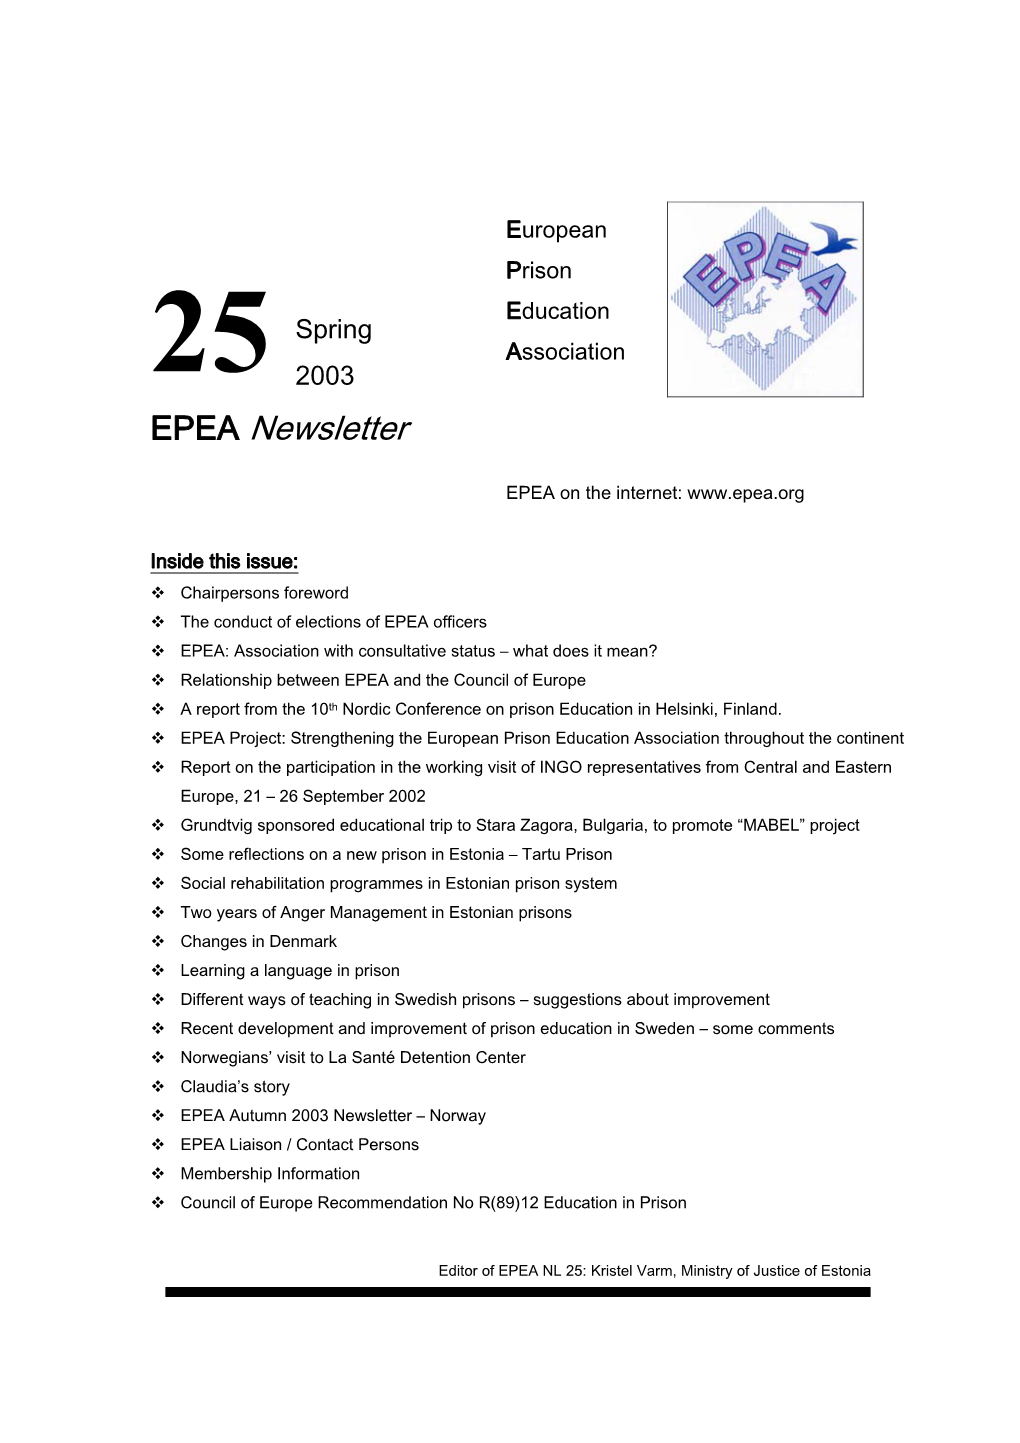 EPEA Newsletter